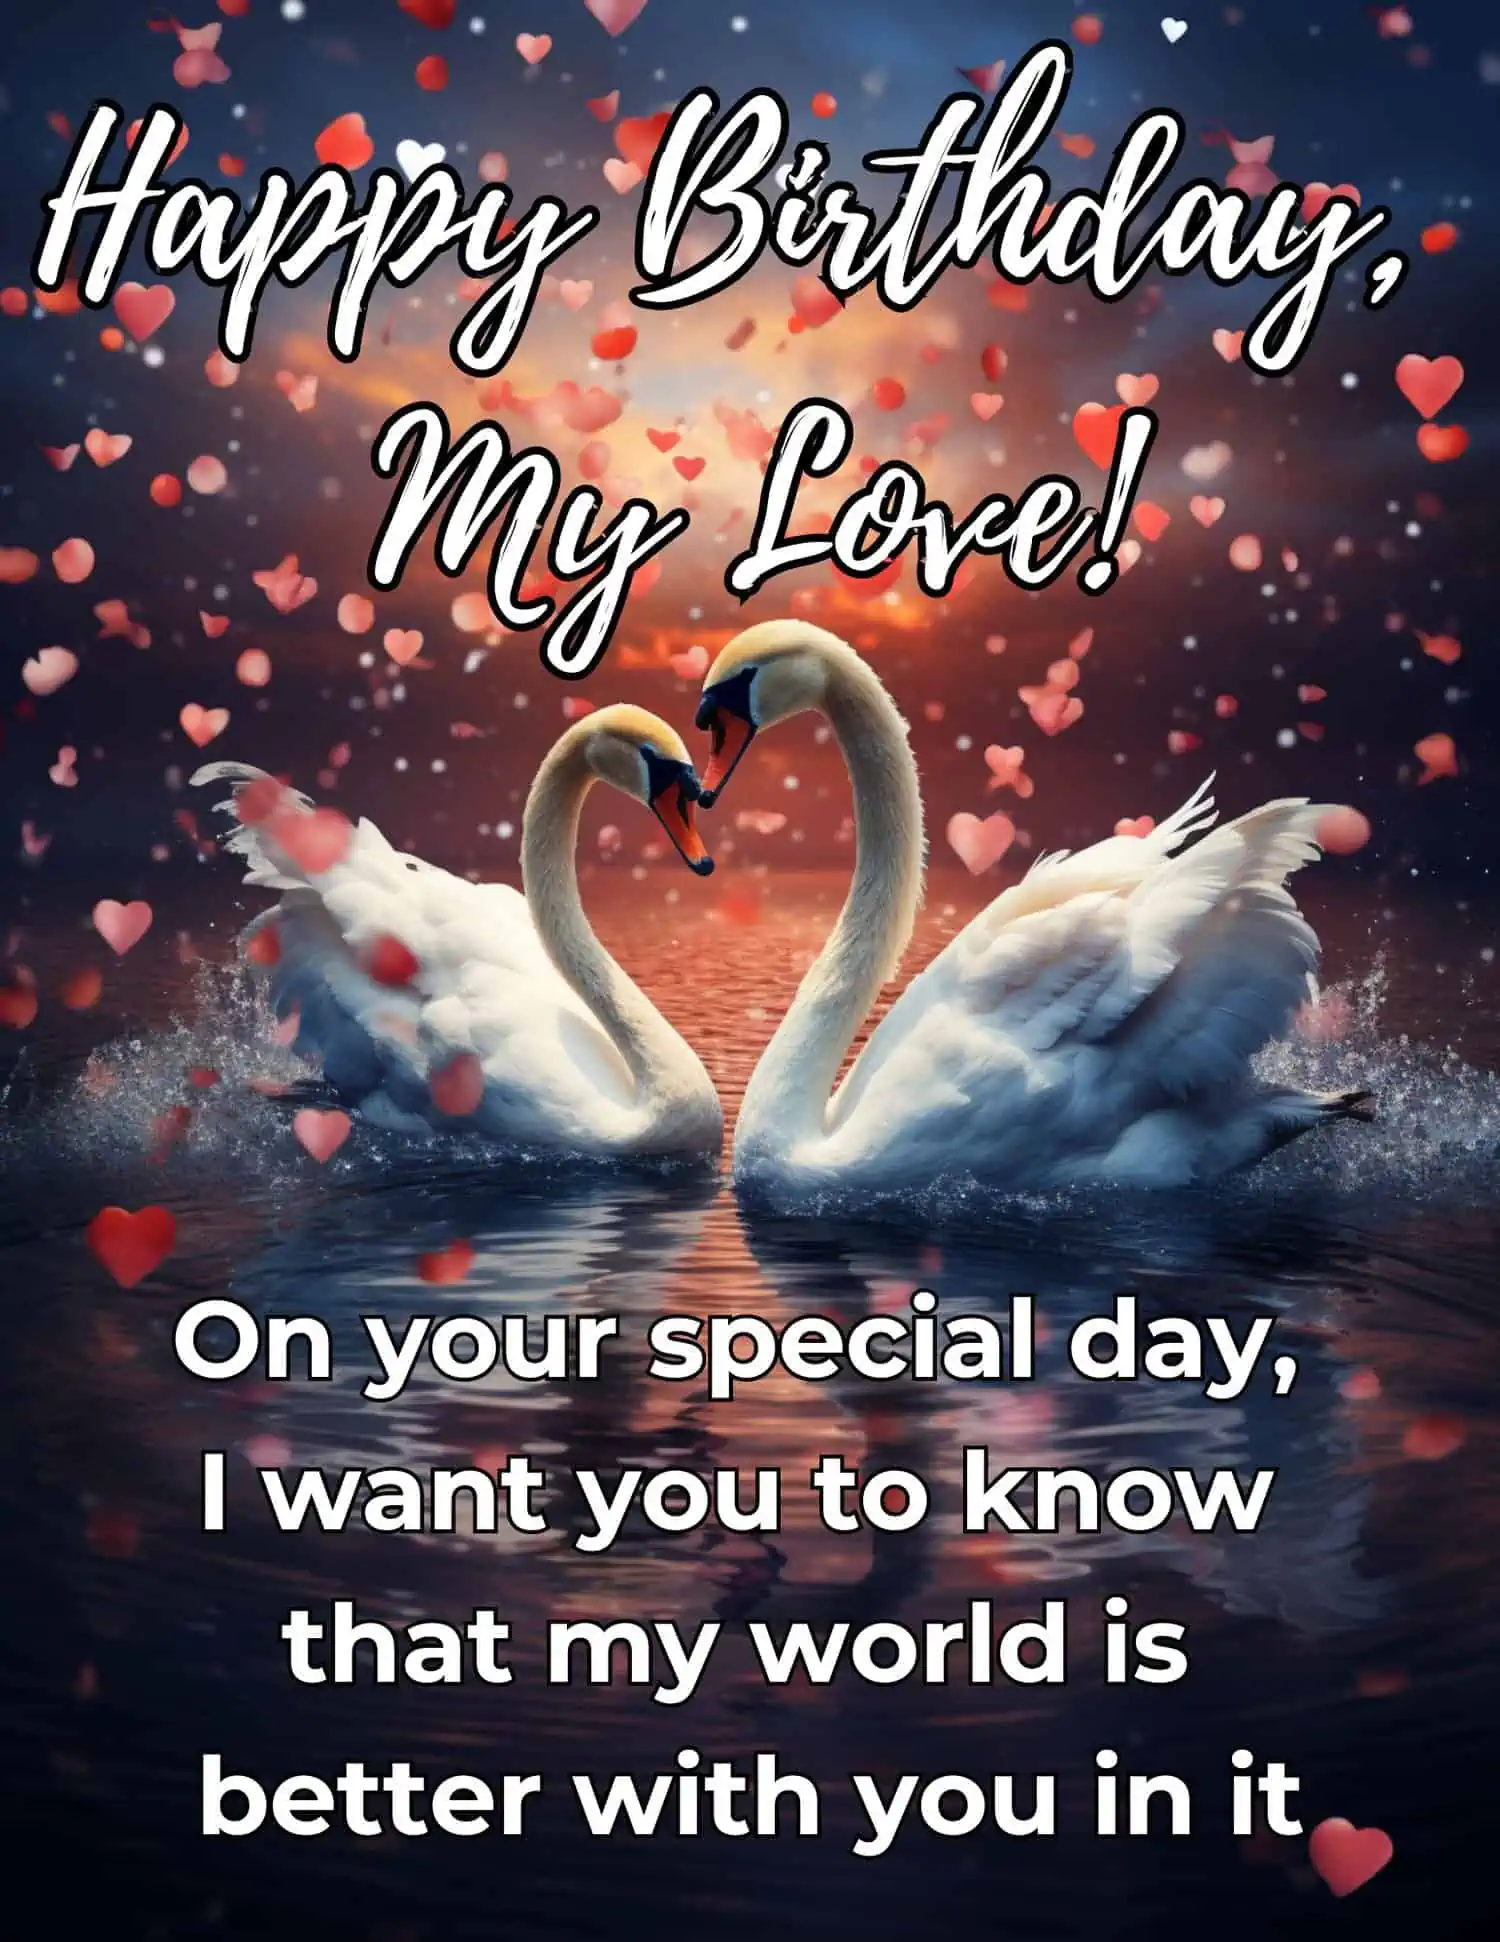 Express your love and affection with these romantic birthday wishes tailored to make your boyfriend's heart flutter on his special day.